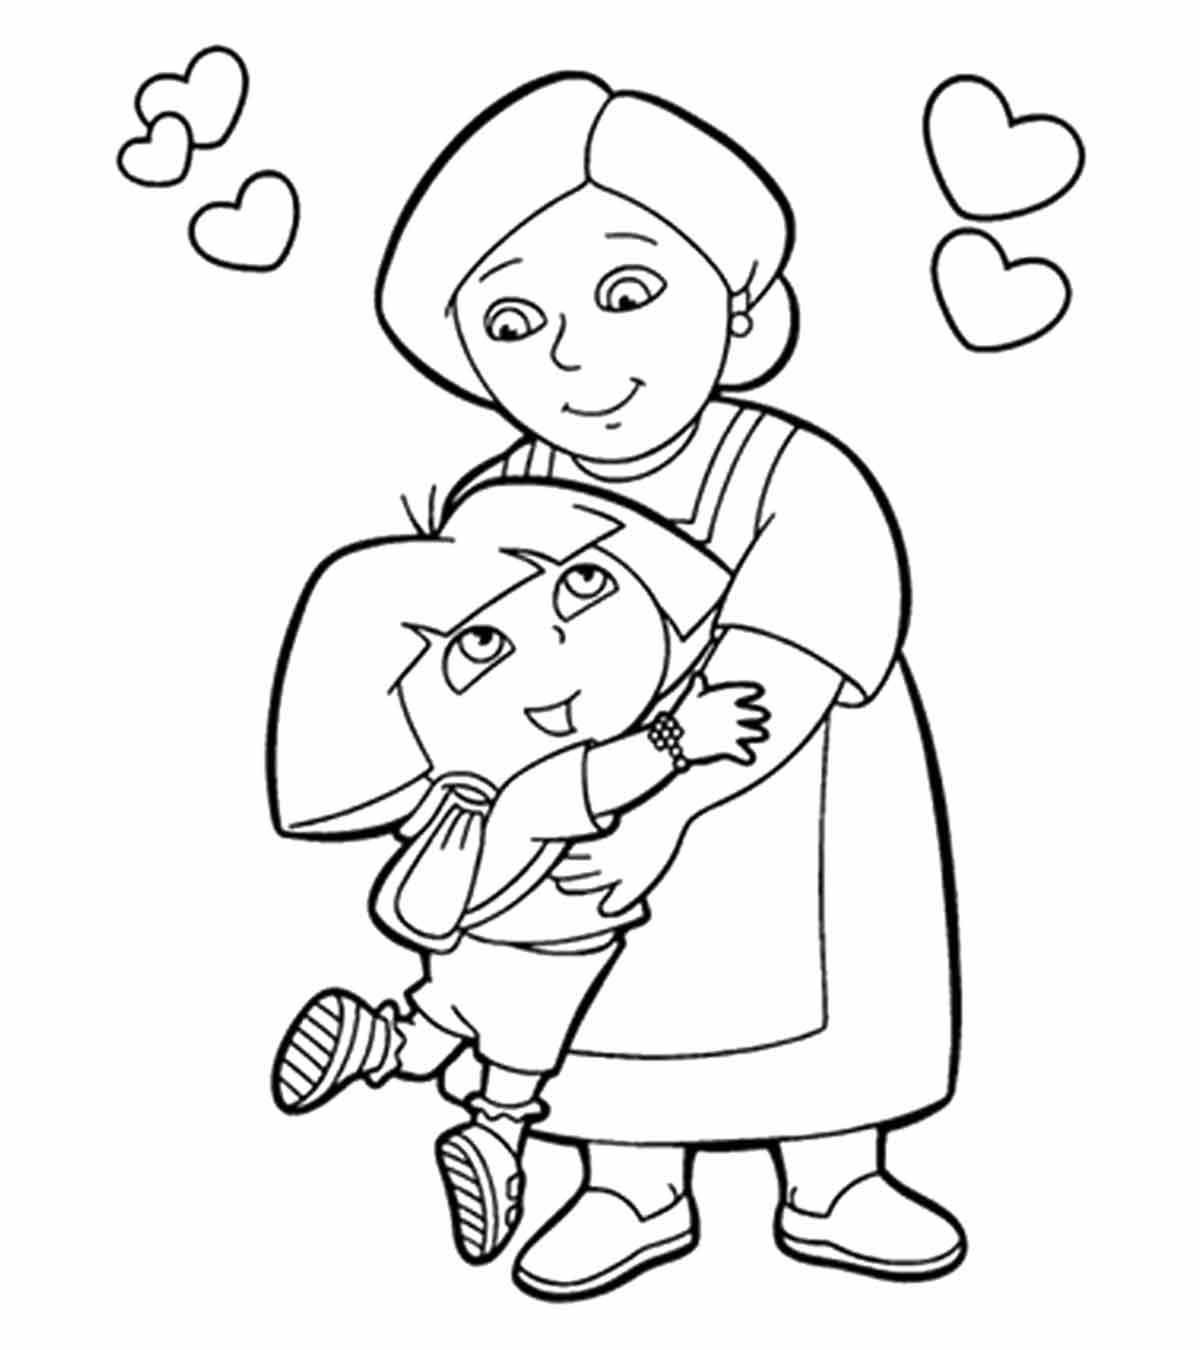 10 Best Grandma Coloring Pages For Your Little Ones_image